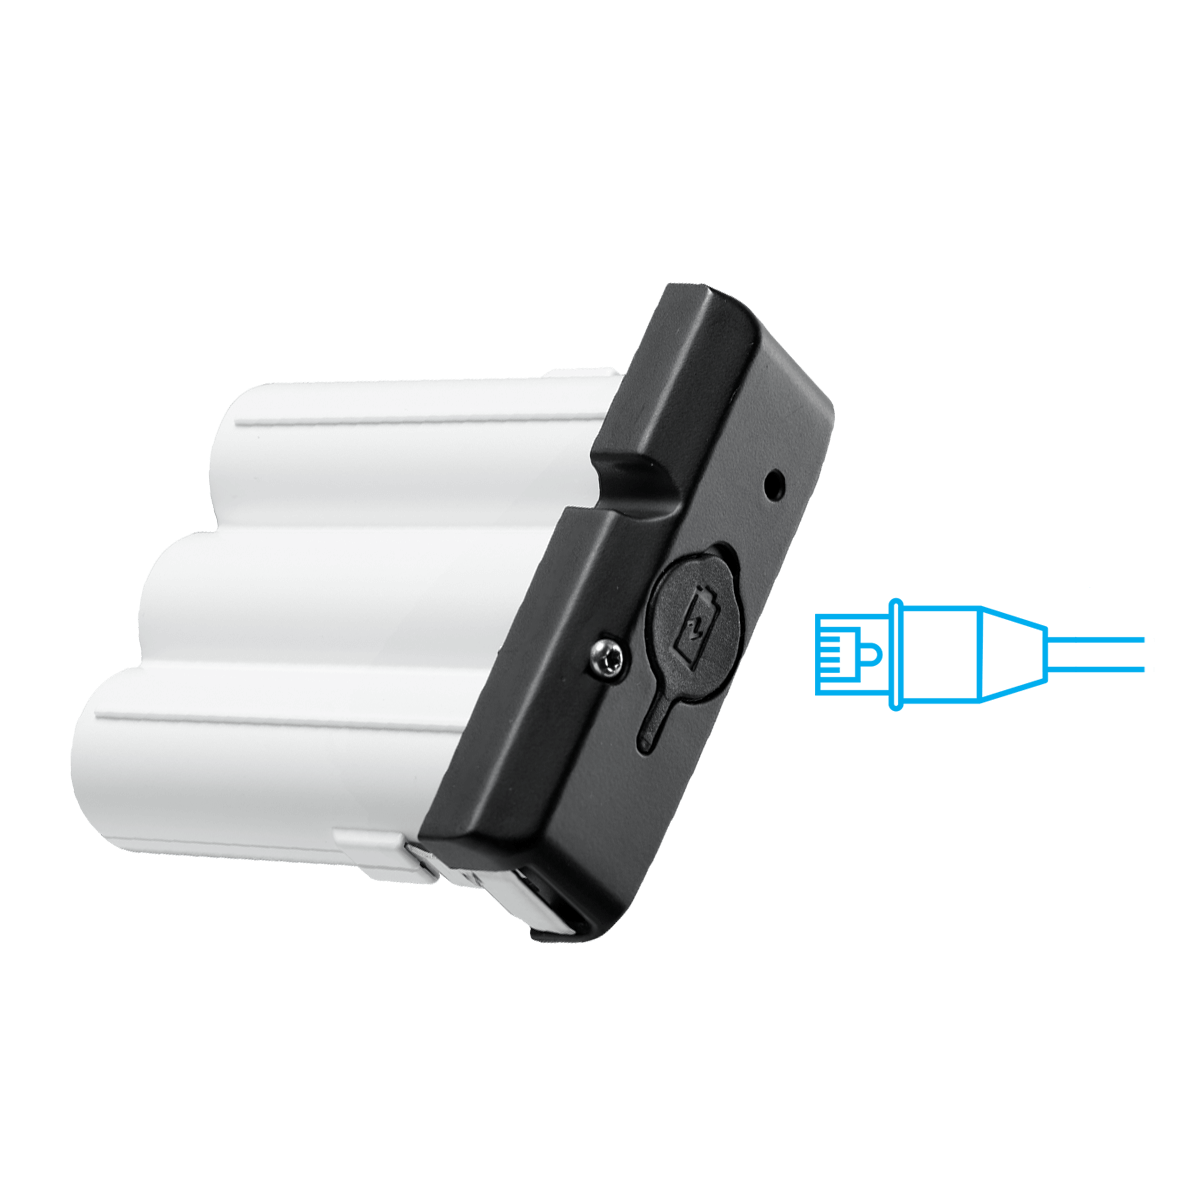 battery power pack with quick release